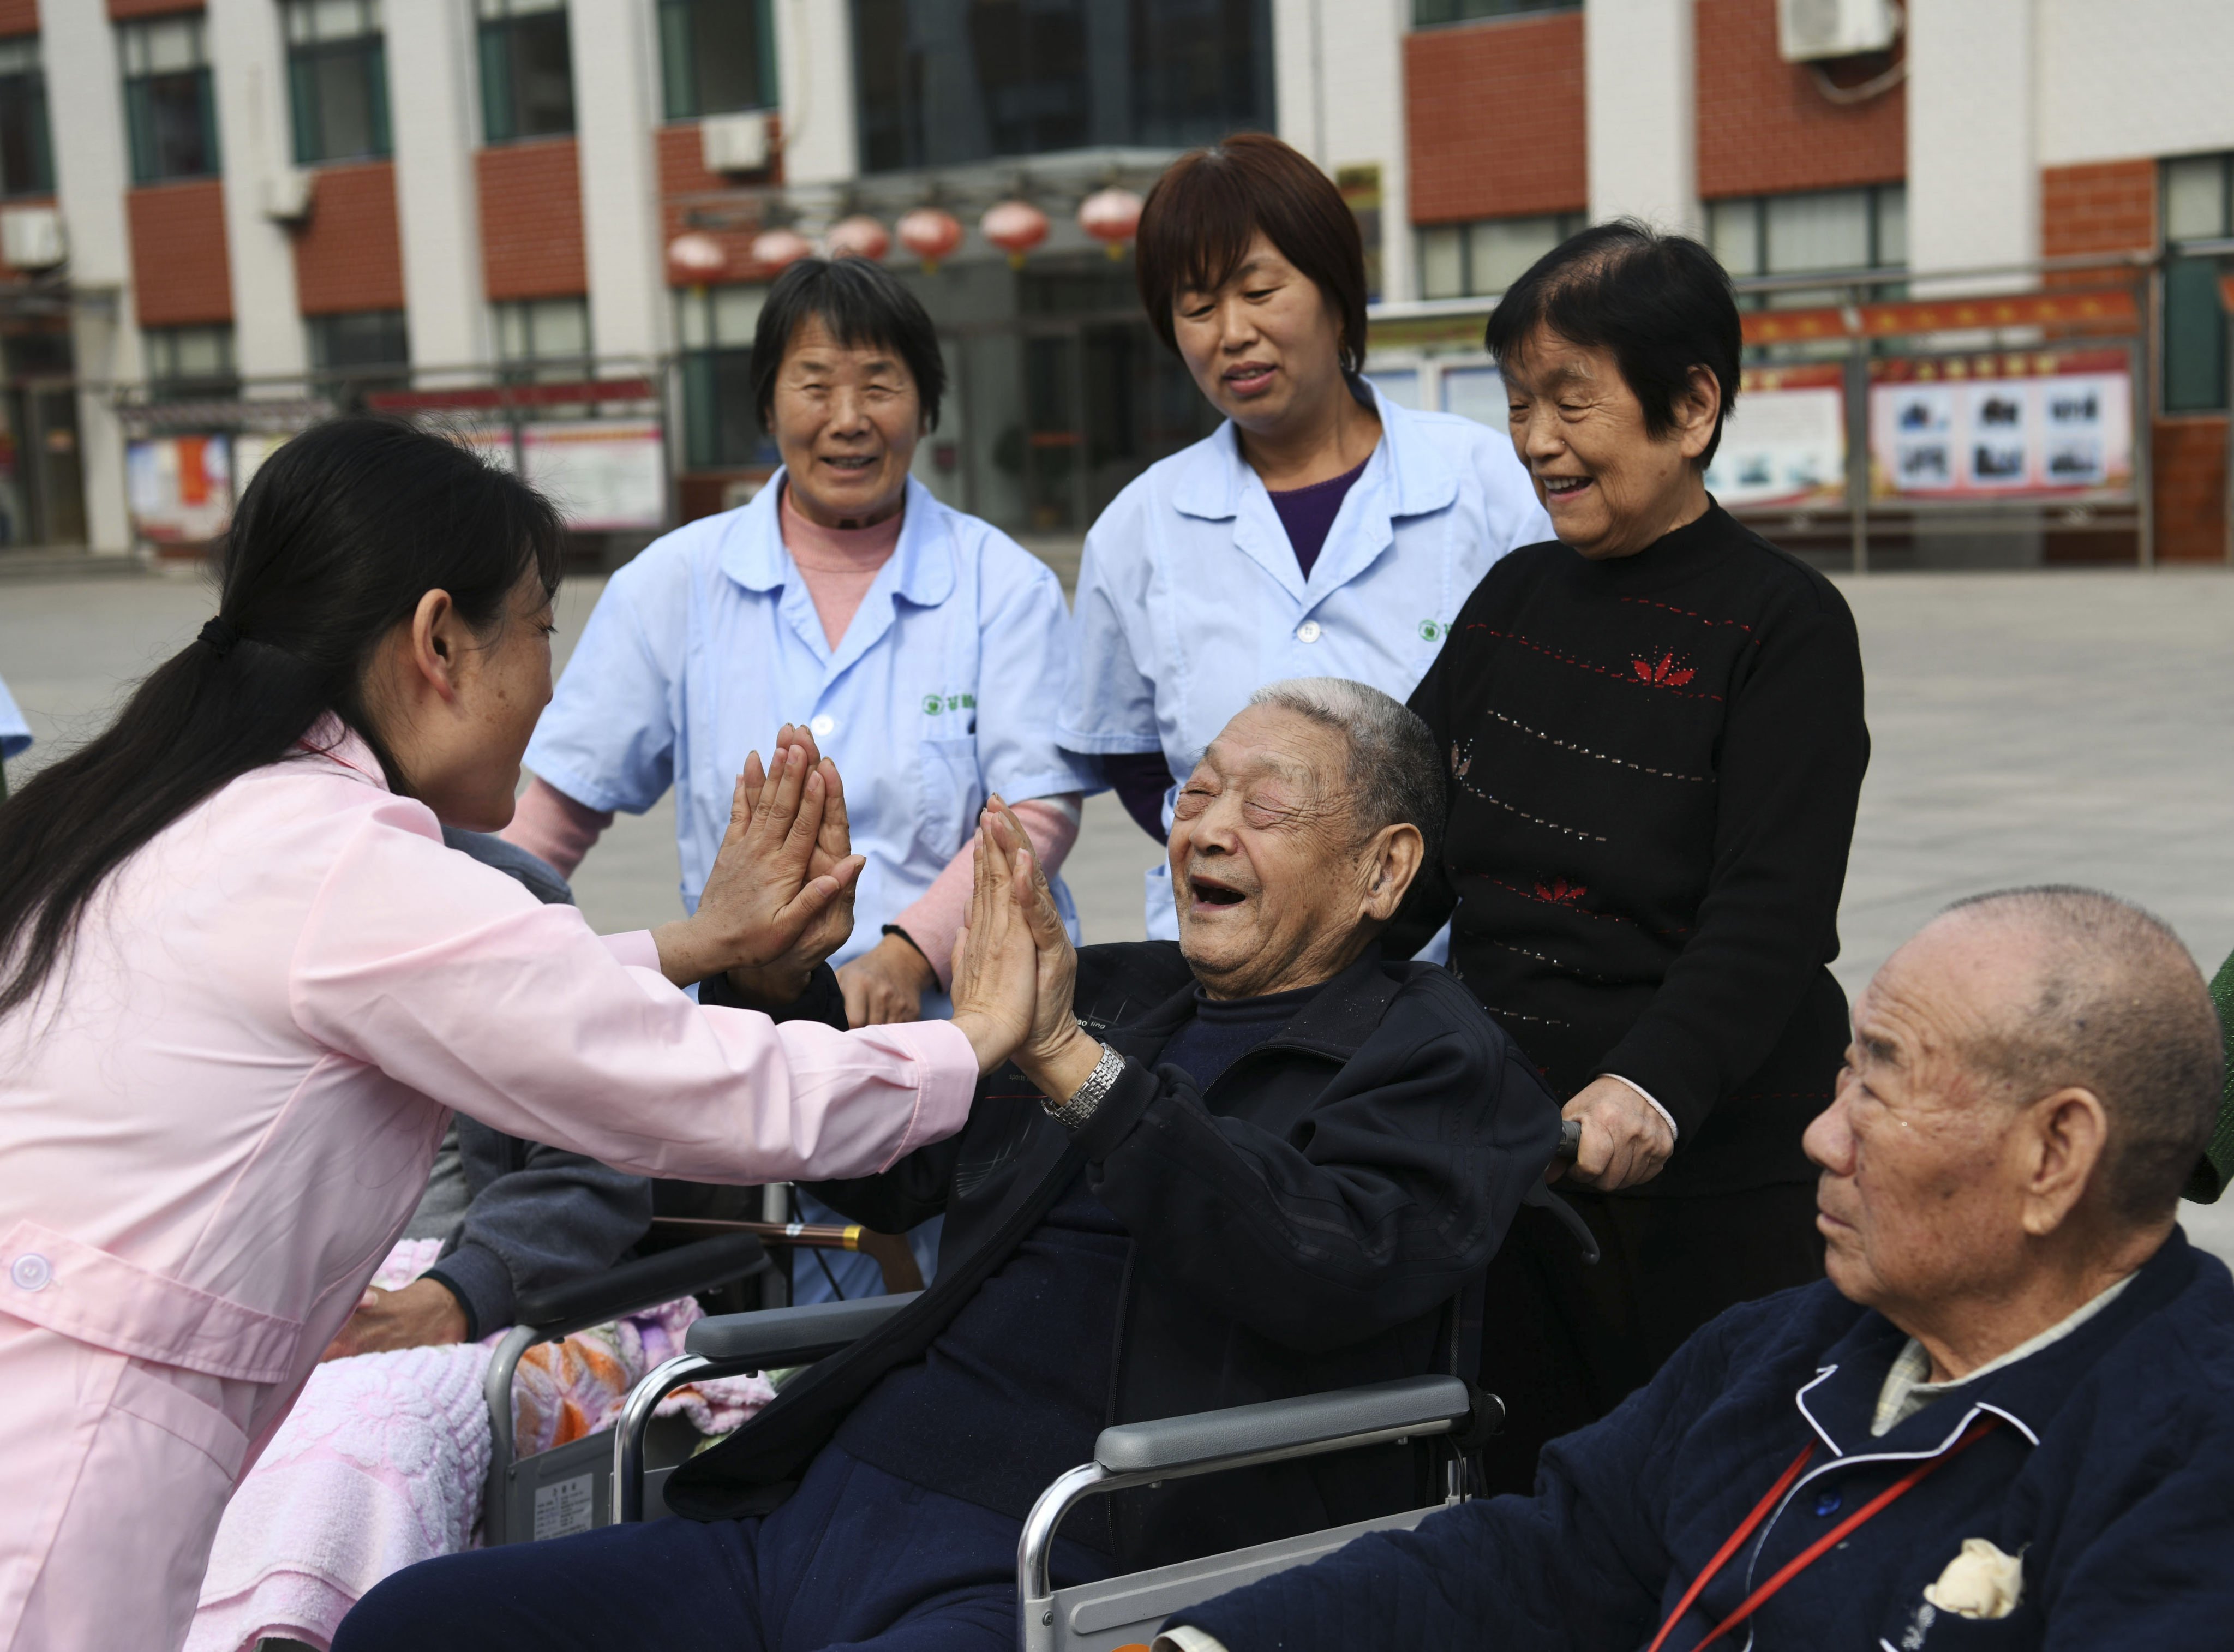 People aged 65 and above accounted for 14.2 per cent of the total population in China in 2021. Photo:  Xinhua